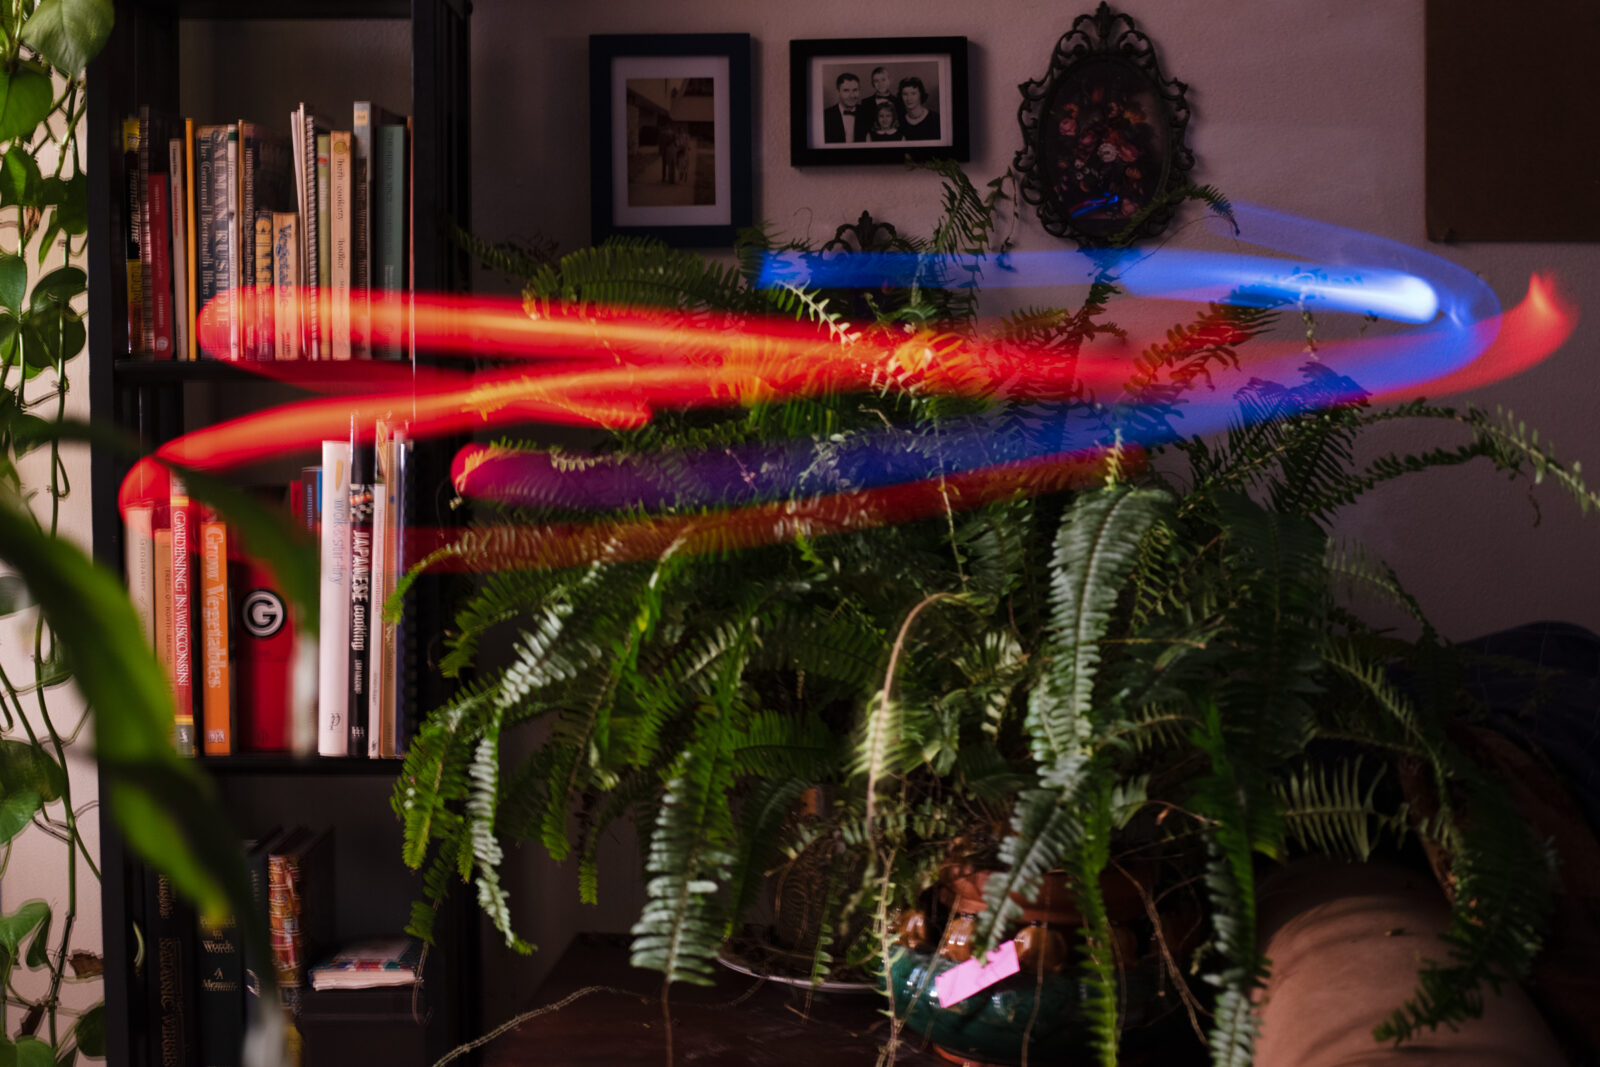 Blue and red light trails hovering over a fern house plant